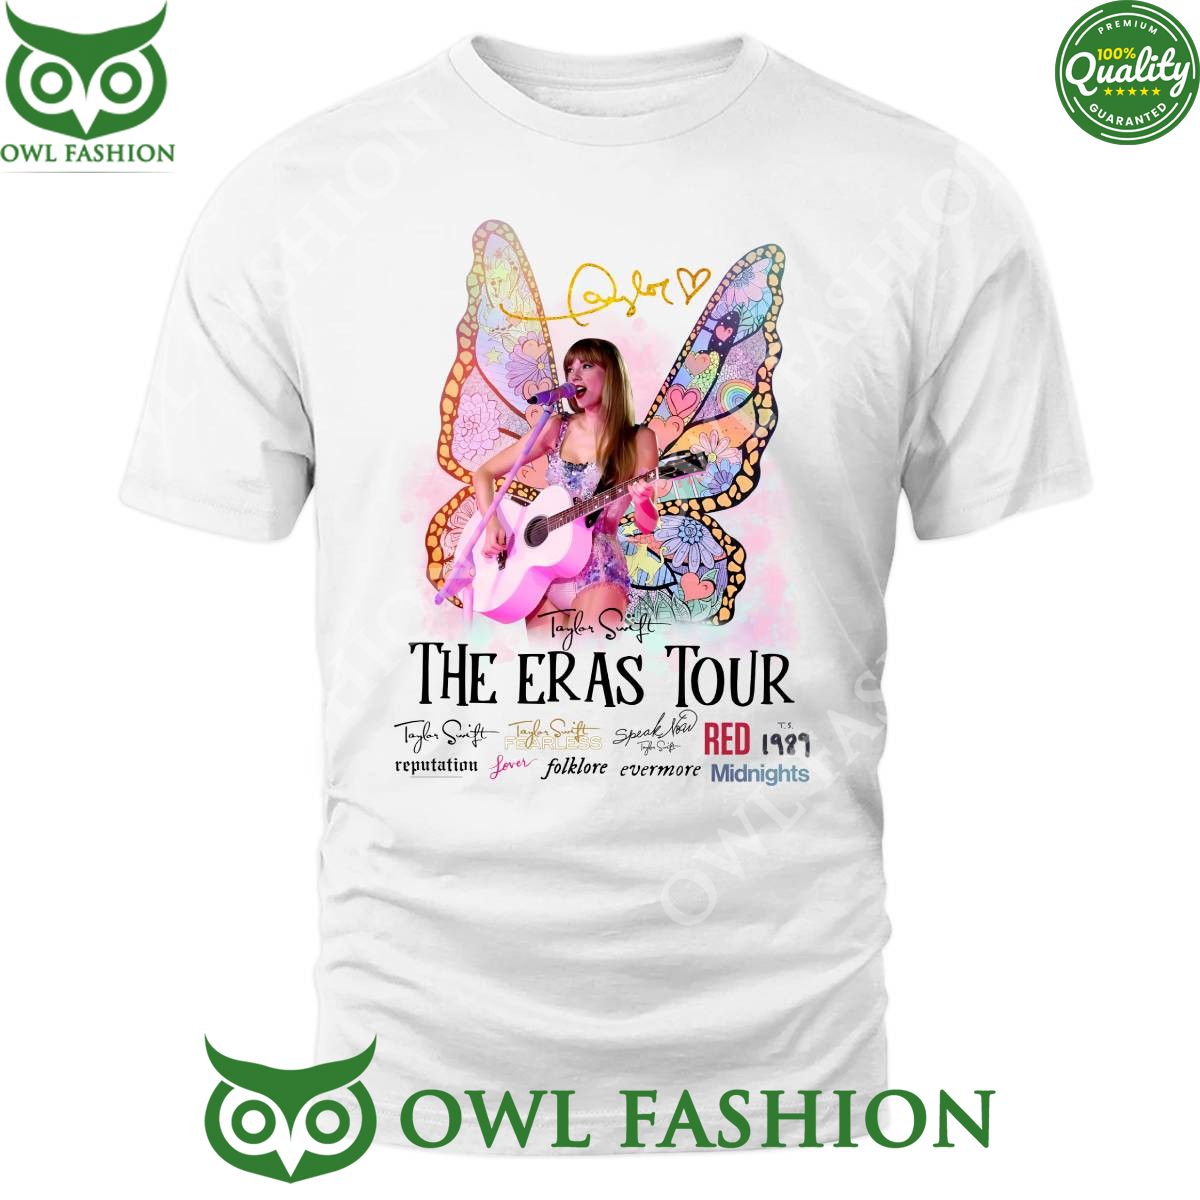 Taylor Swift Butterfly The Eras Tour Red 1989 t shirt Best picture ever